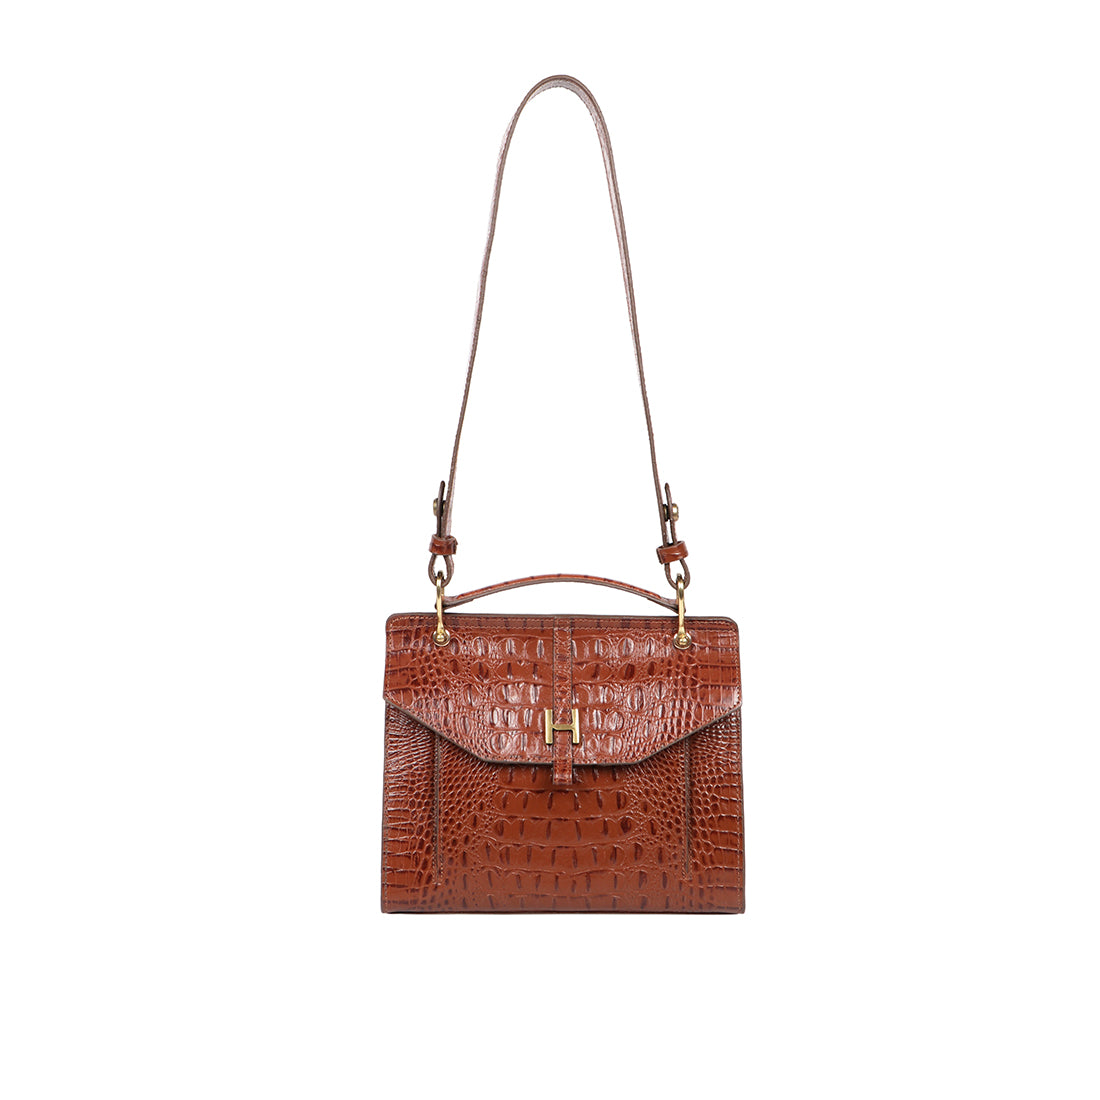 All these bags are under $25 and they retail for $99 on the @bebe webs... |  TikTok